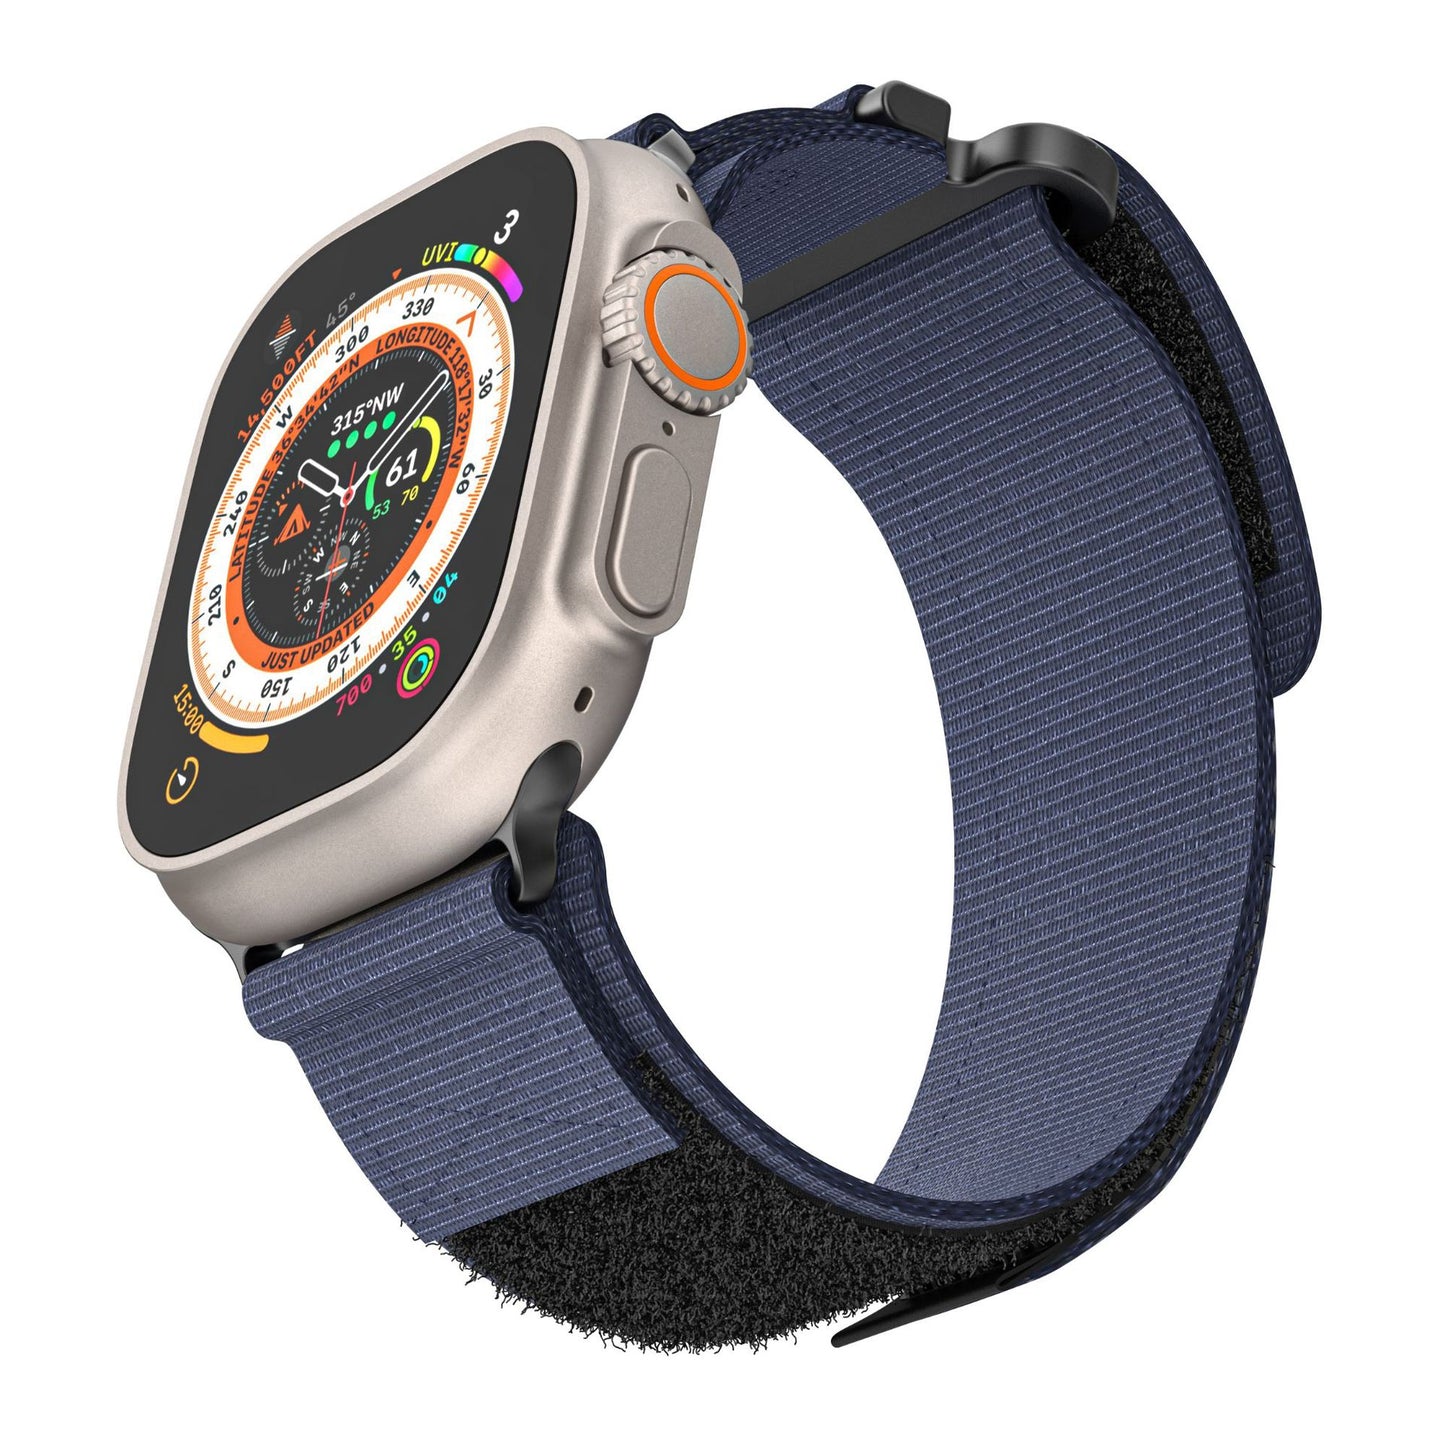 Best selling pet supplies featuring Nylon Woven Watch Strap for Sports and Velcro iWatch Strap4